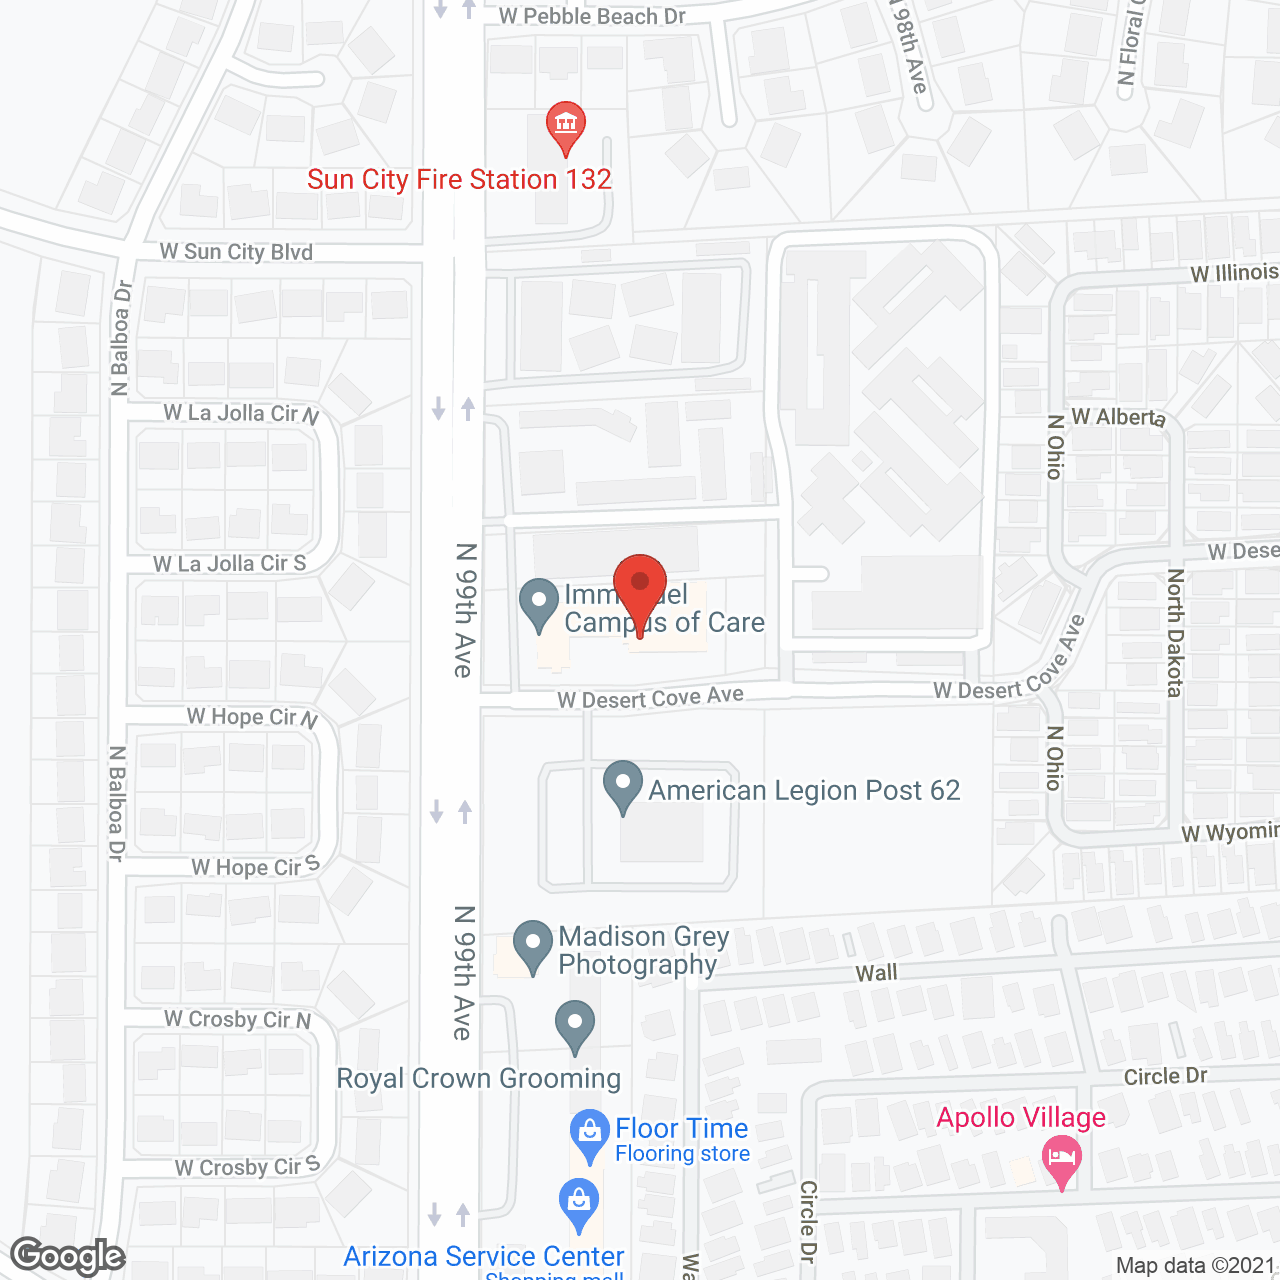 Immanuel Campus of Care in google map